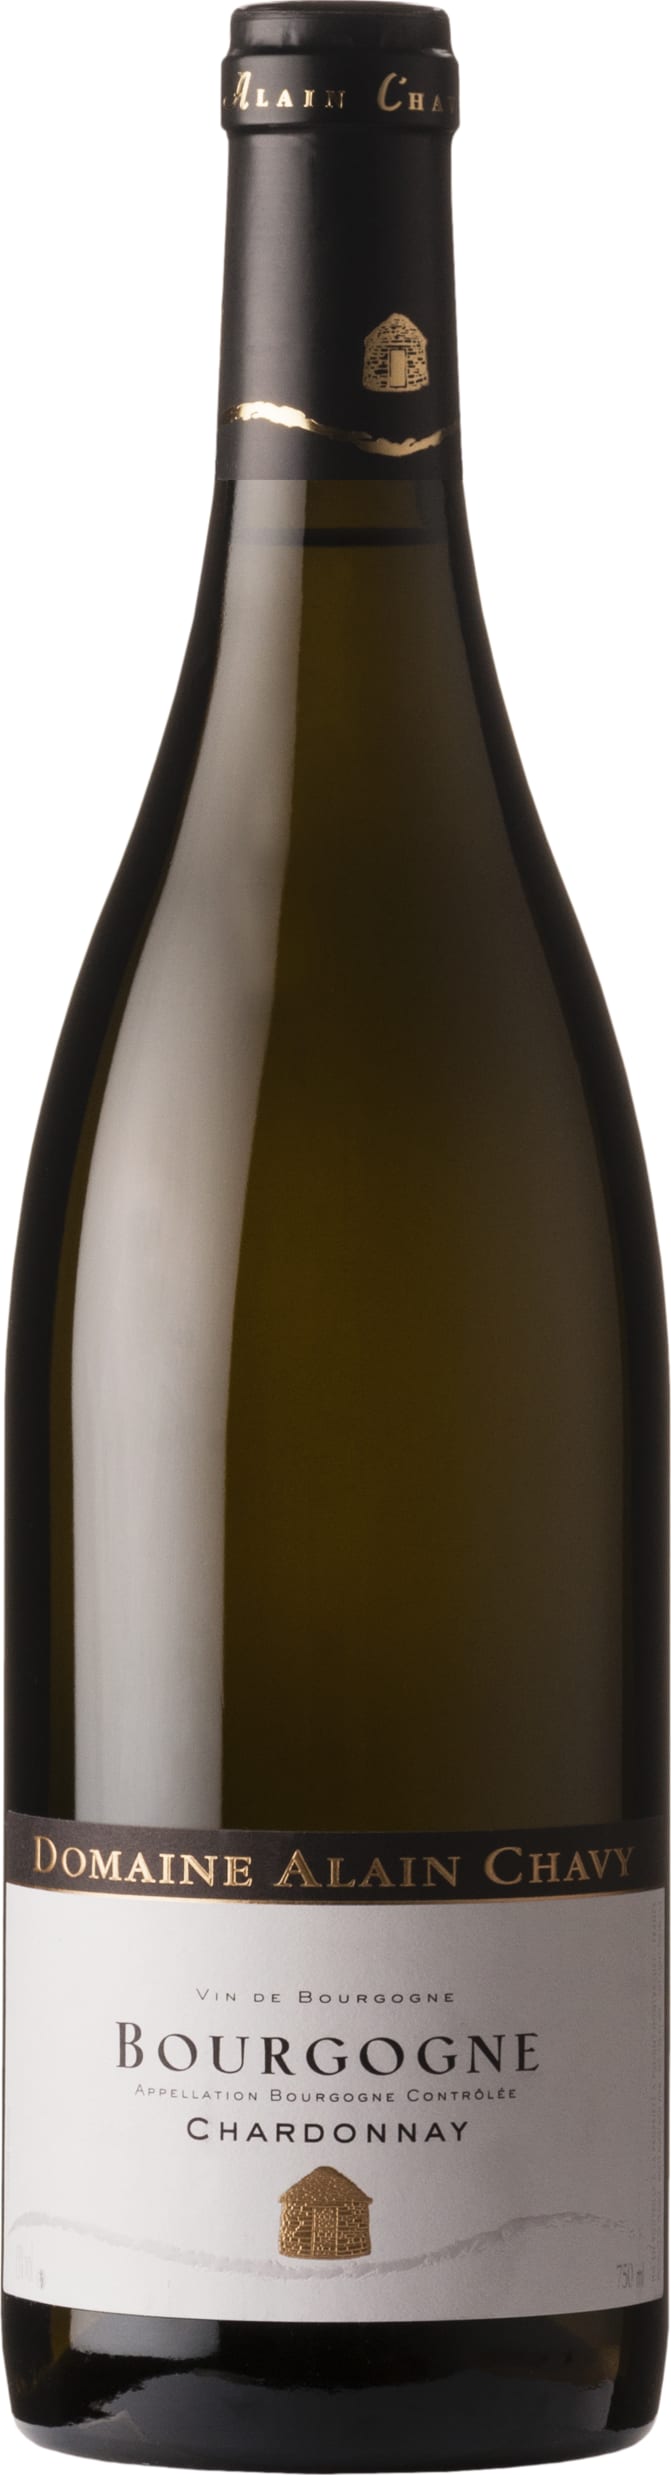 Alain Chavy Bourgogne Blanc 2021 75cl - Buy Alain Chavy Wines from GREAT WINES DIRECT wine shop